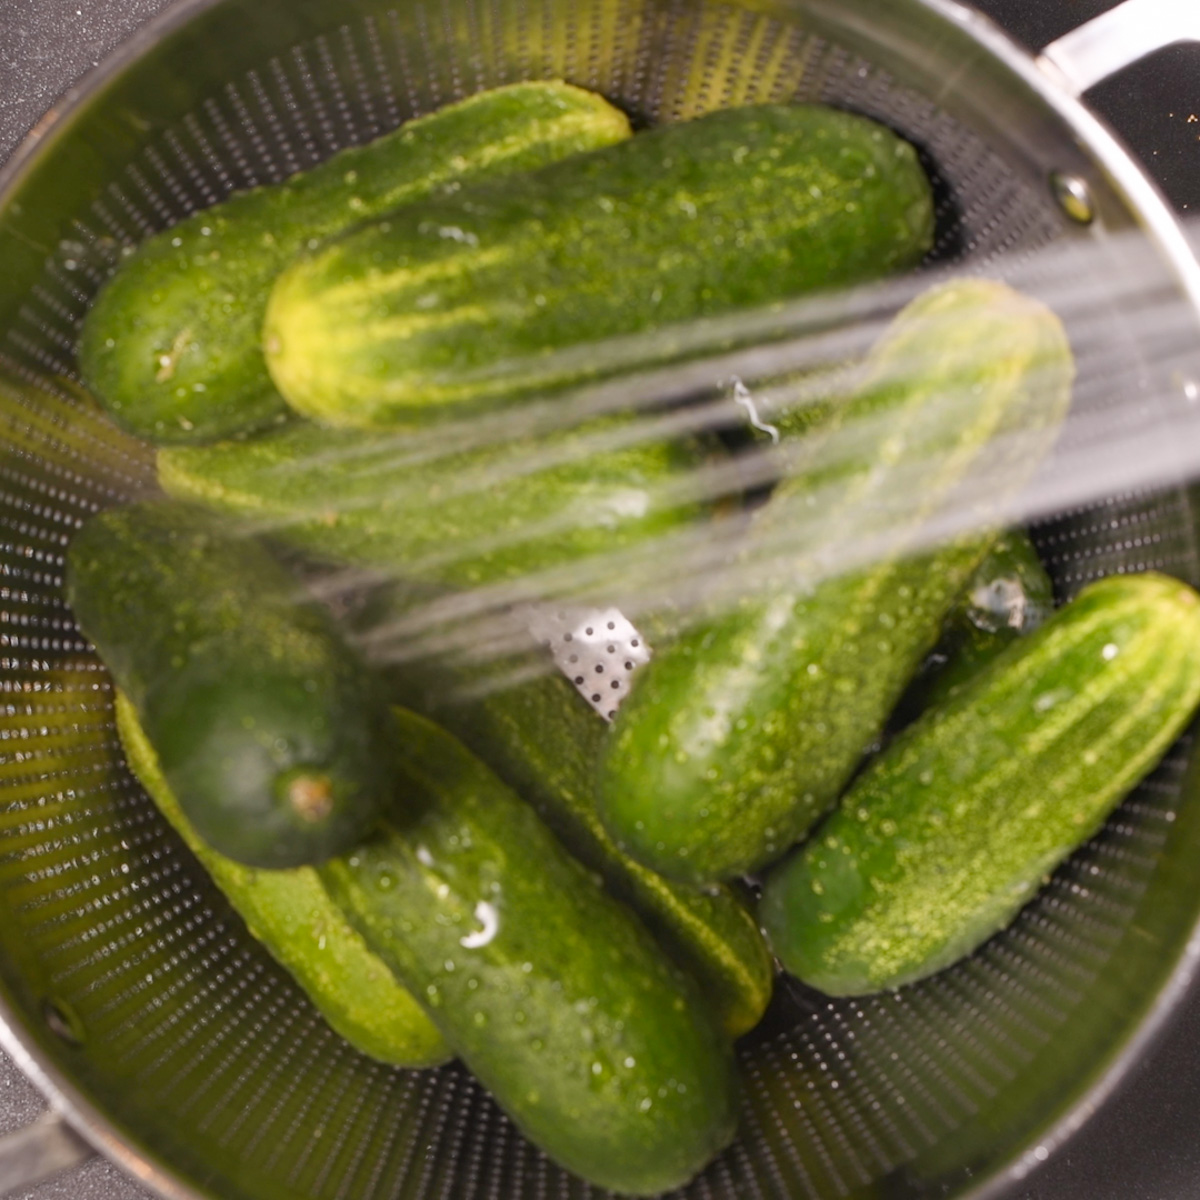 Rinse the cucumbers.